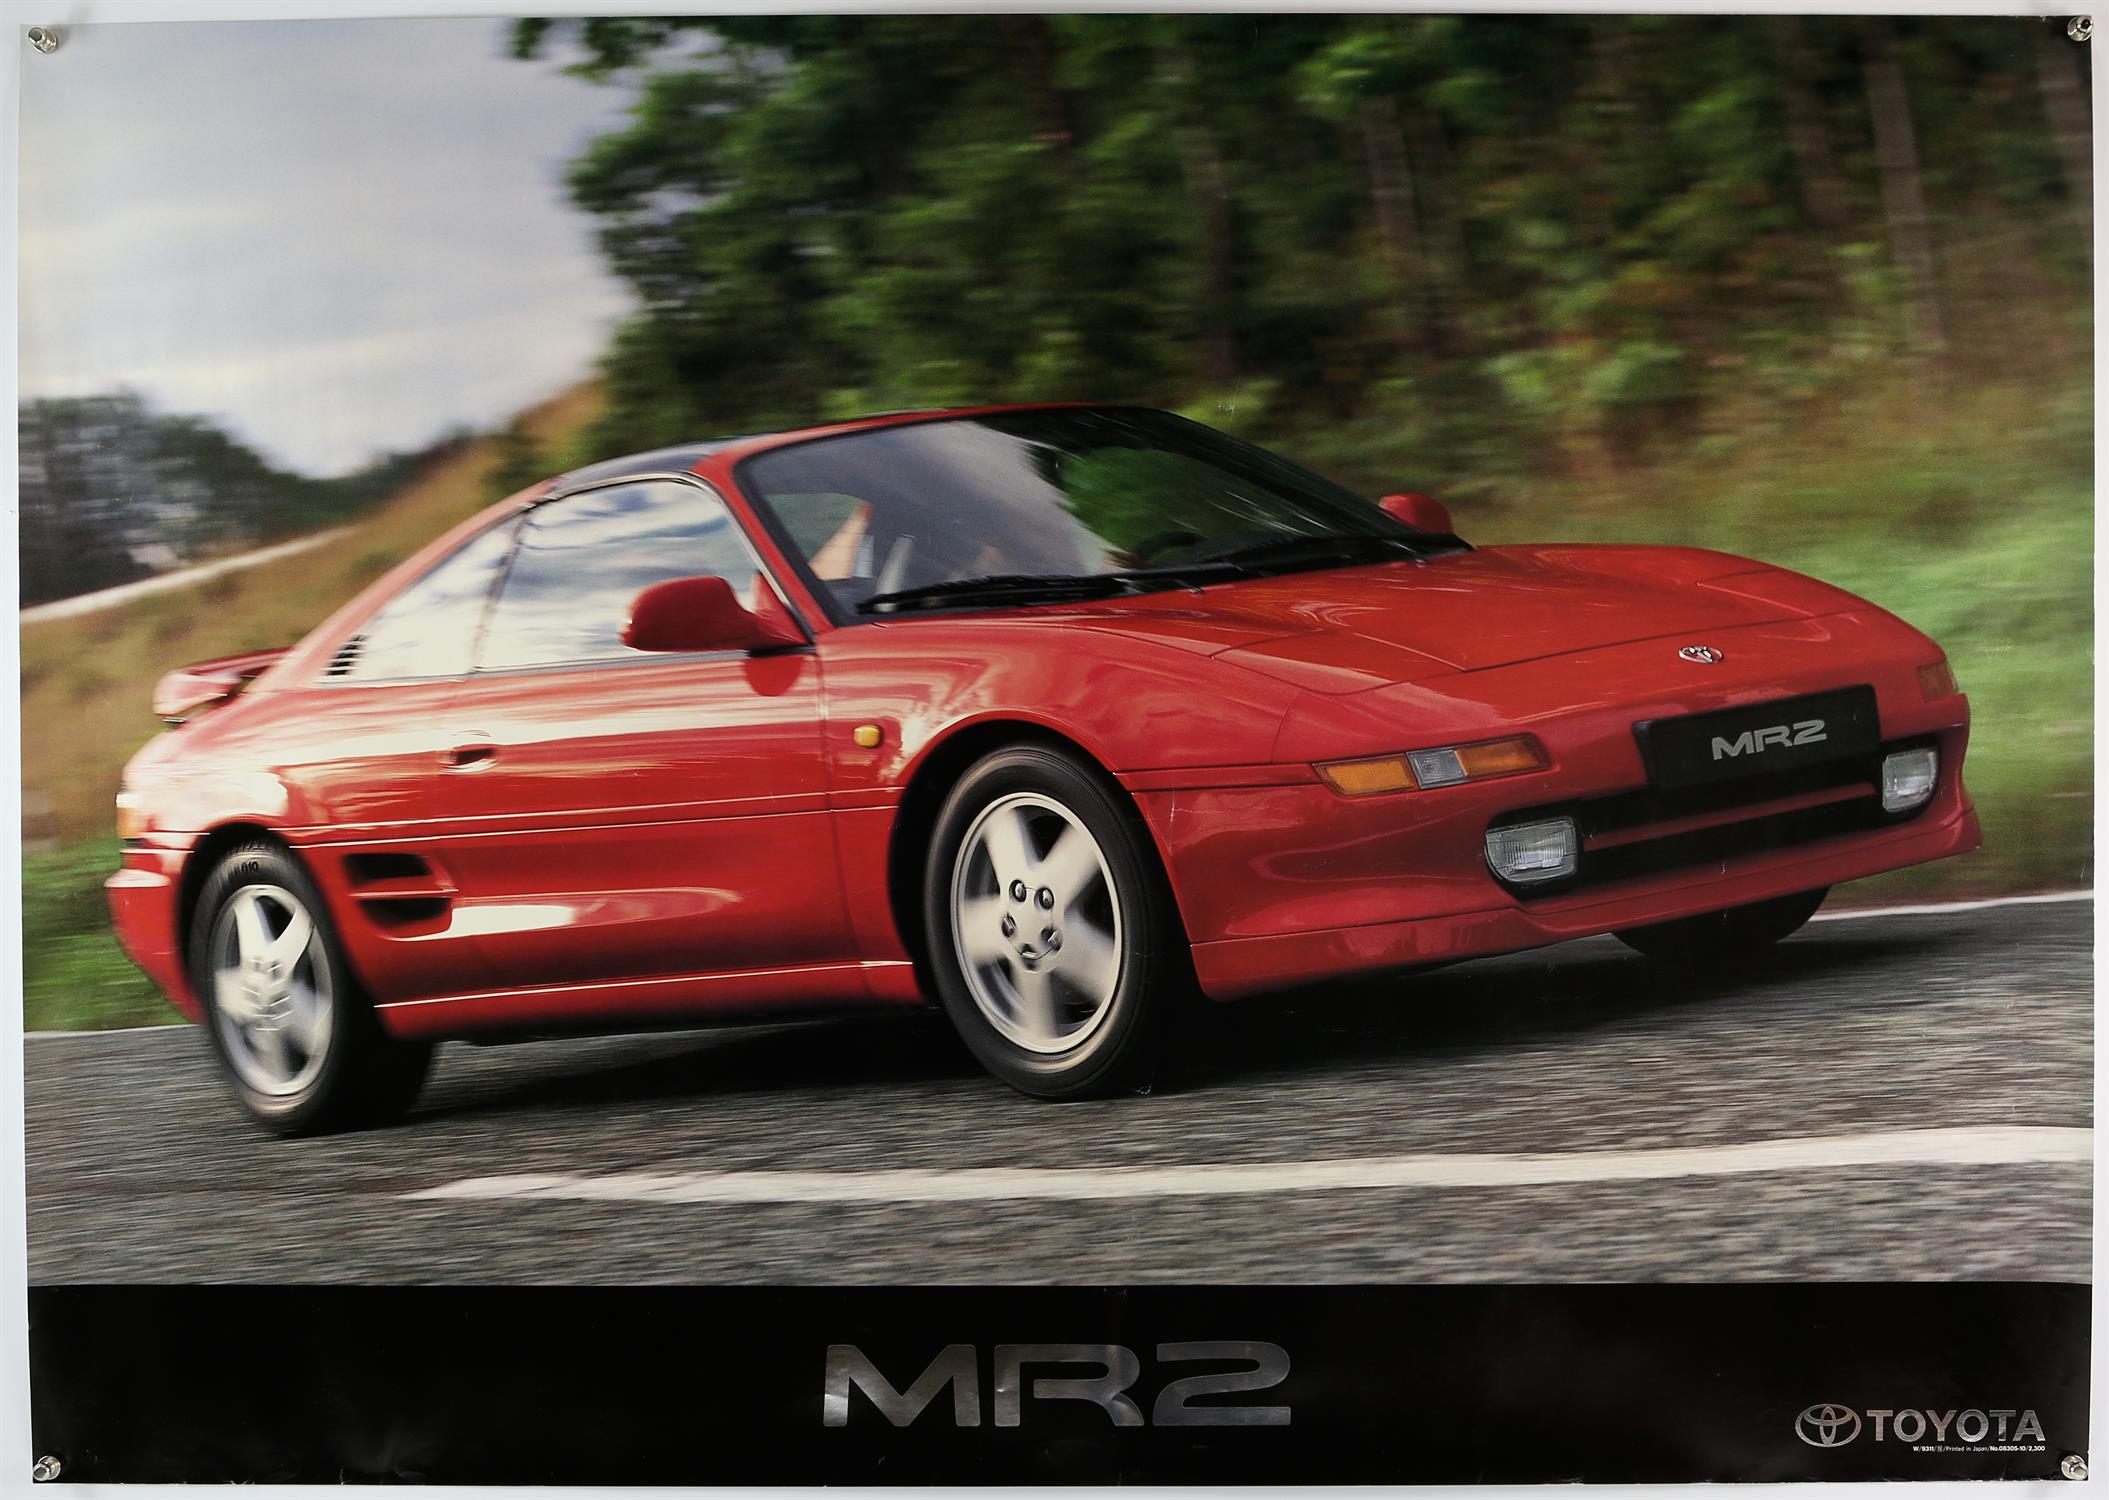 Toyota MR2 - circa 1995 original factory poster, approx. 40" x 28" rolled.